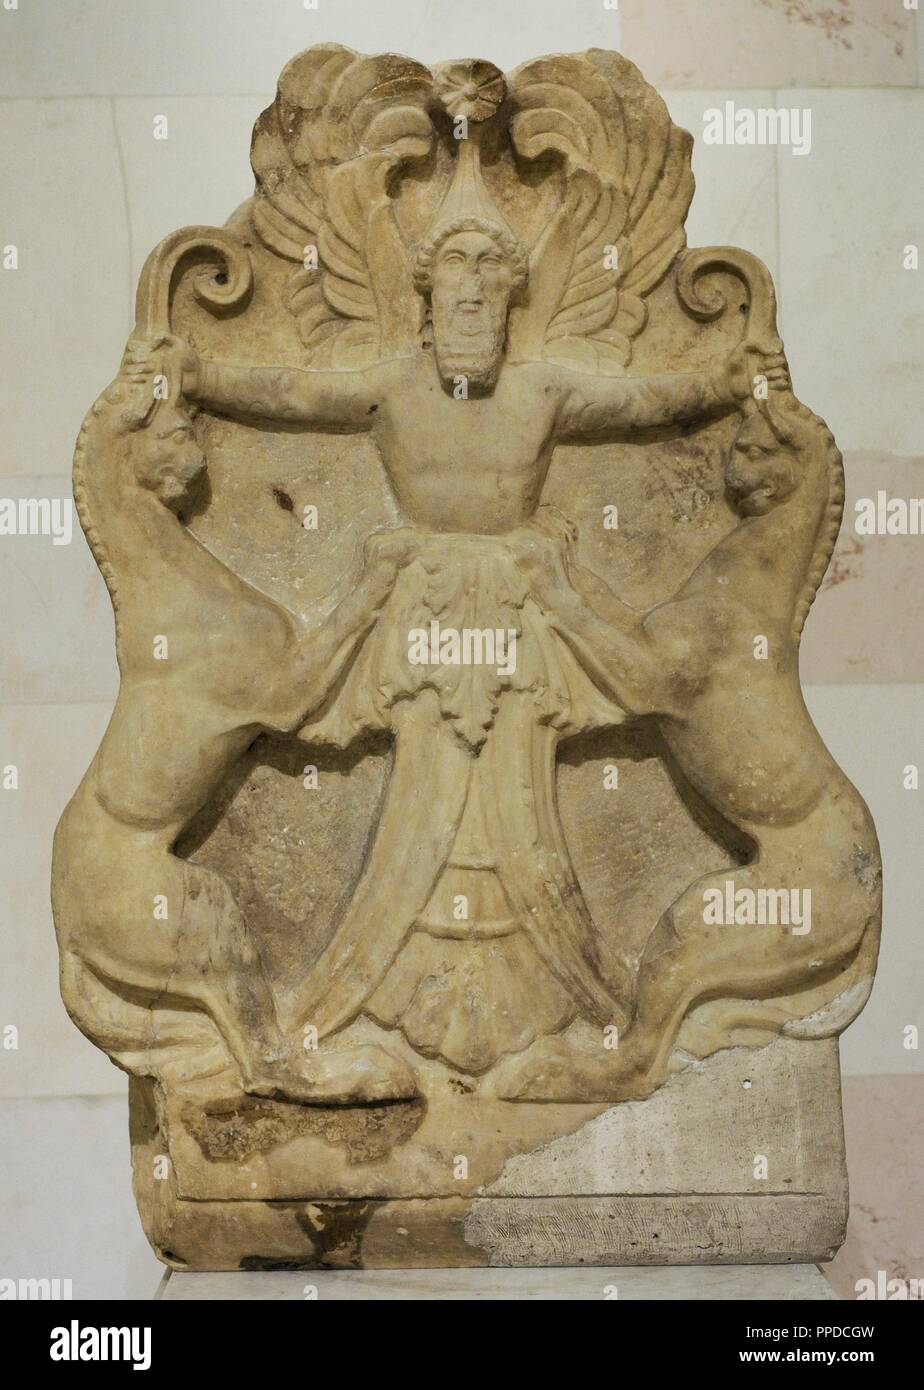 Greek art. Acroterium or architectural decorative element with a relief depicting Arimaspian (winged-deity) holding griffins by their horns. 3rd century BC. Marble. The state Hermitage Museum. Saint Petersburg. Russia. Stock Photo